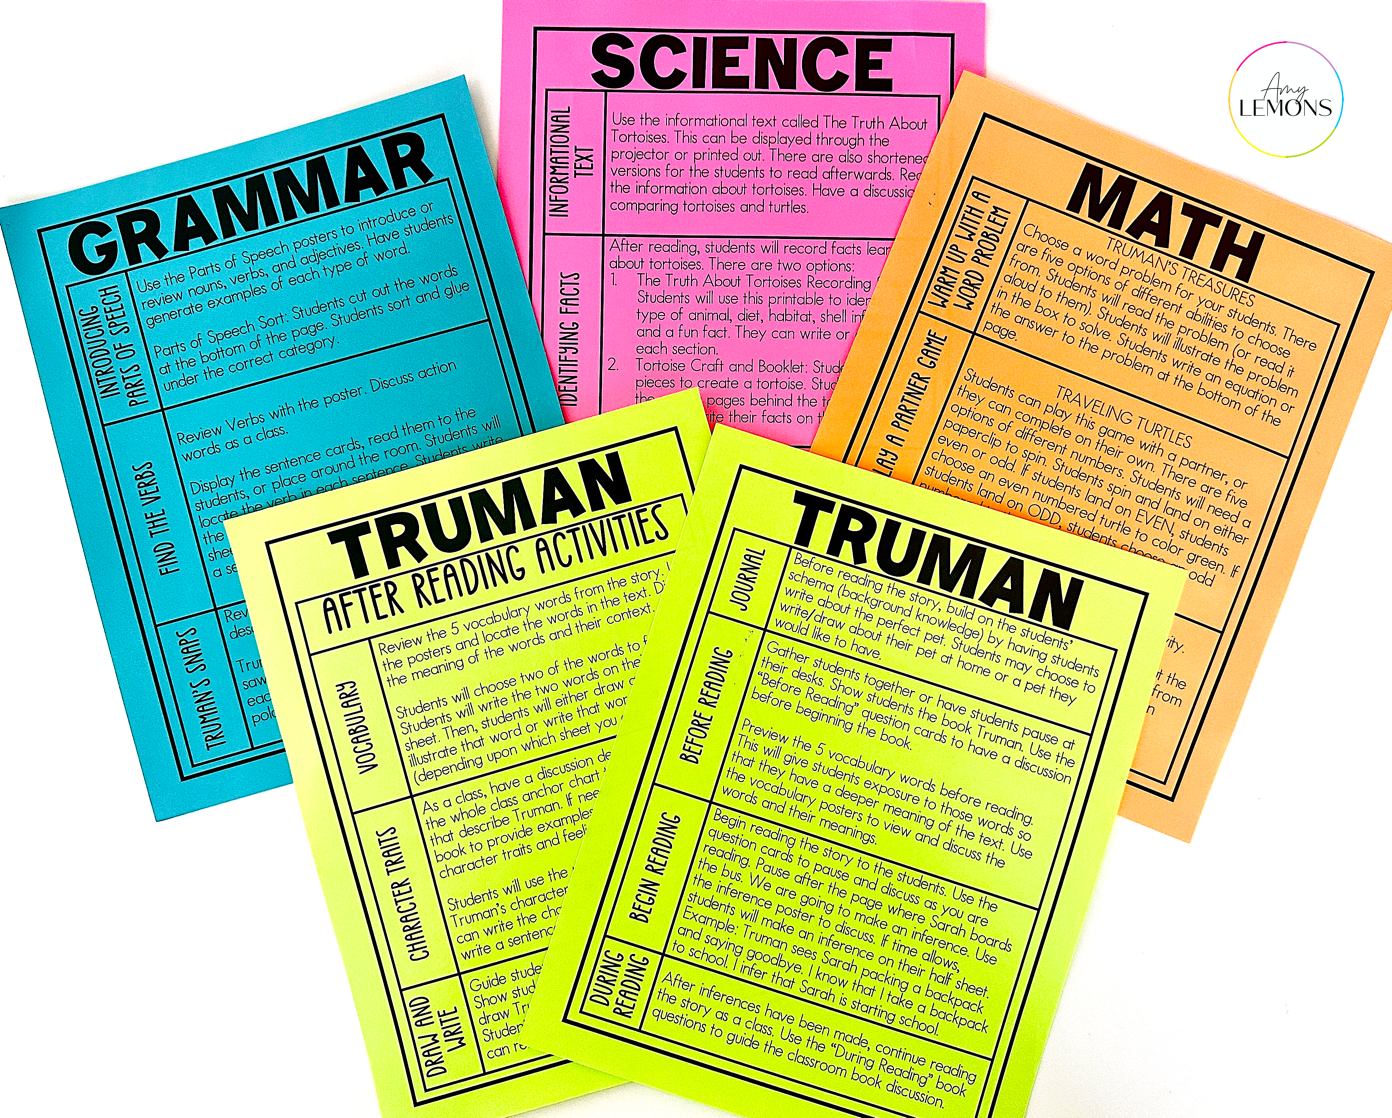 Colorful reading printables in green, pink, orange and blue for the book Truman.